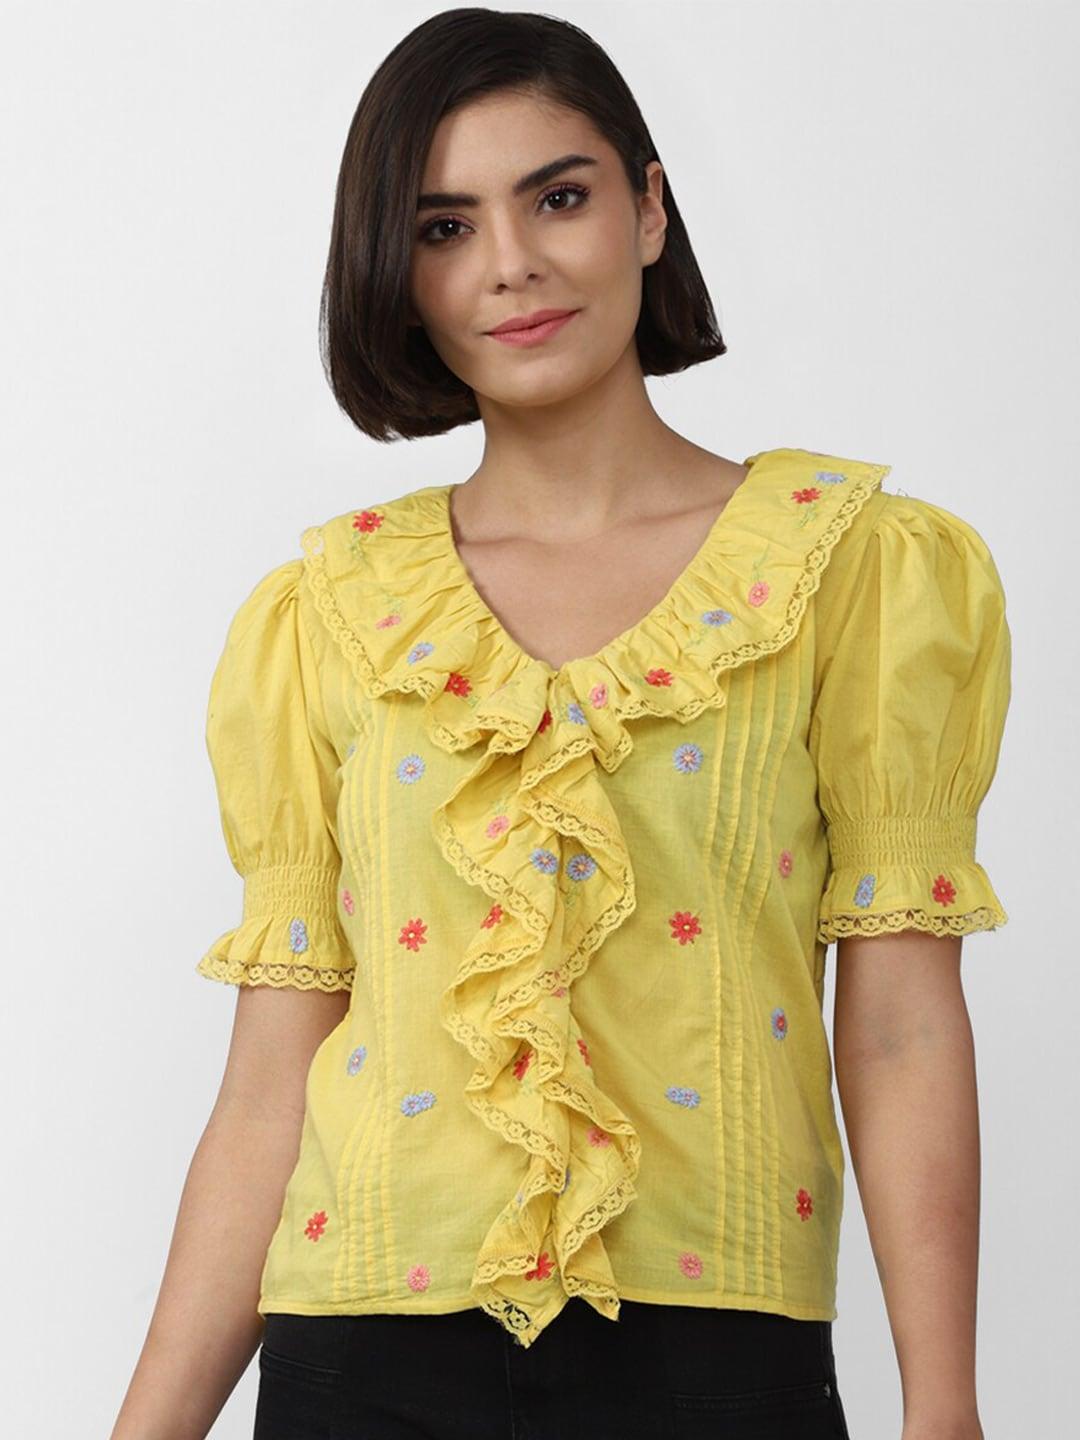 FOREVER 21 Yellow & Pink Floral Embroidered Ruffles Top